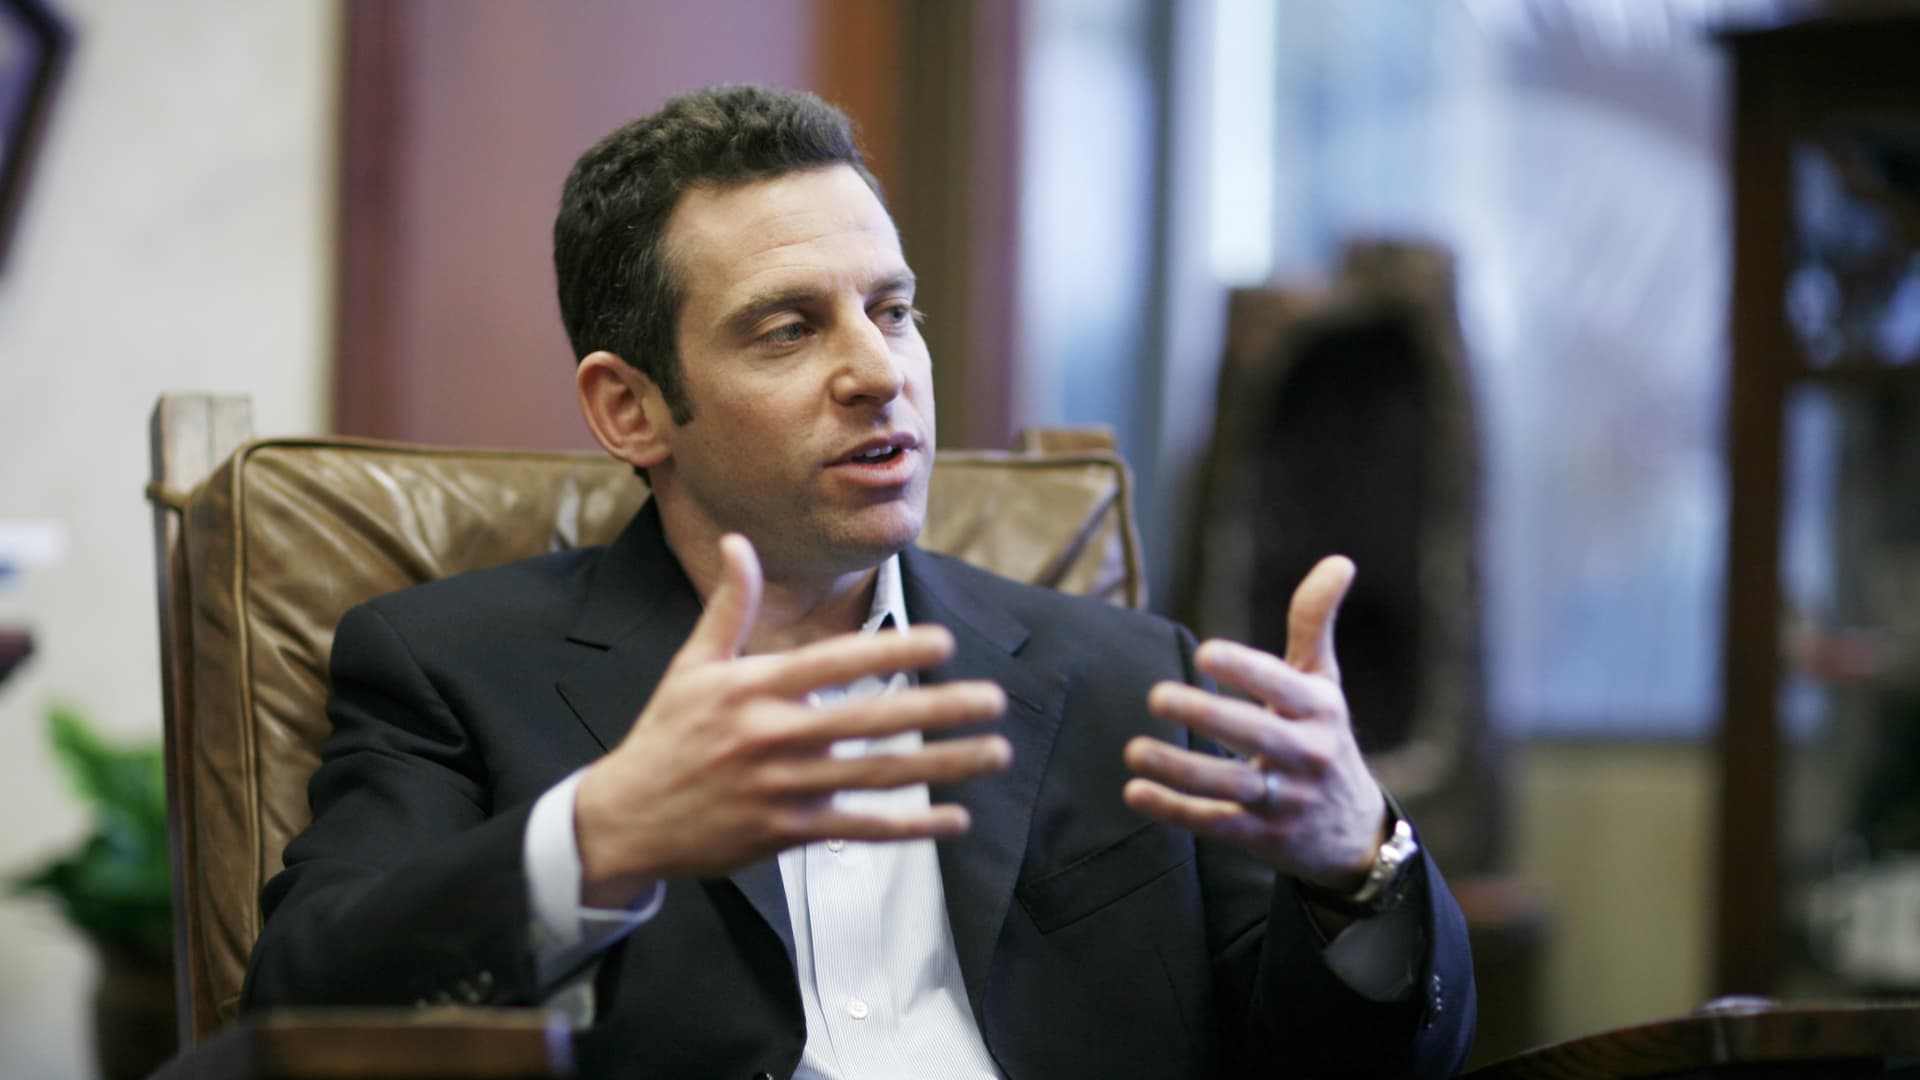 Sam Harris, neuroscientist, New York Times bestselling author, host of the Making Sense podcast, and creator of the Waking Up course and podcast.